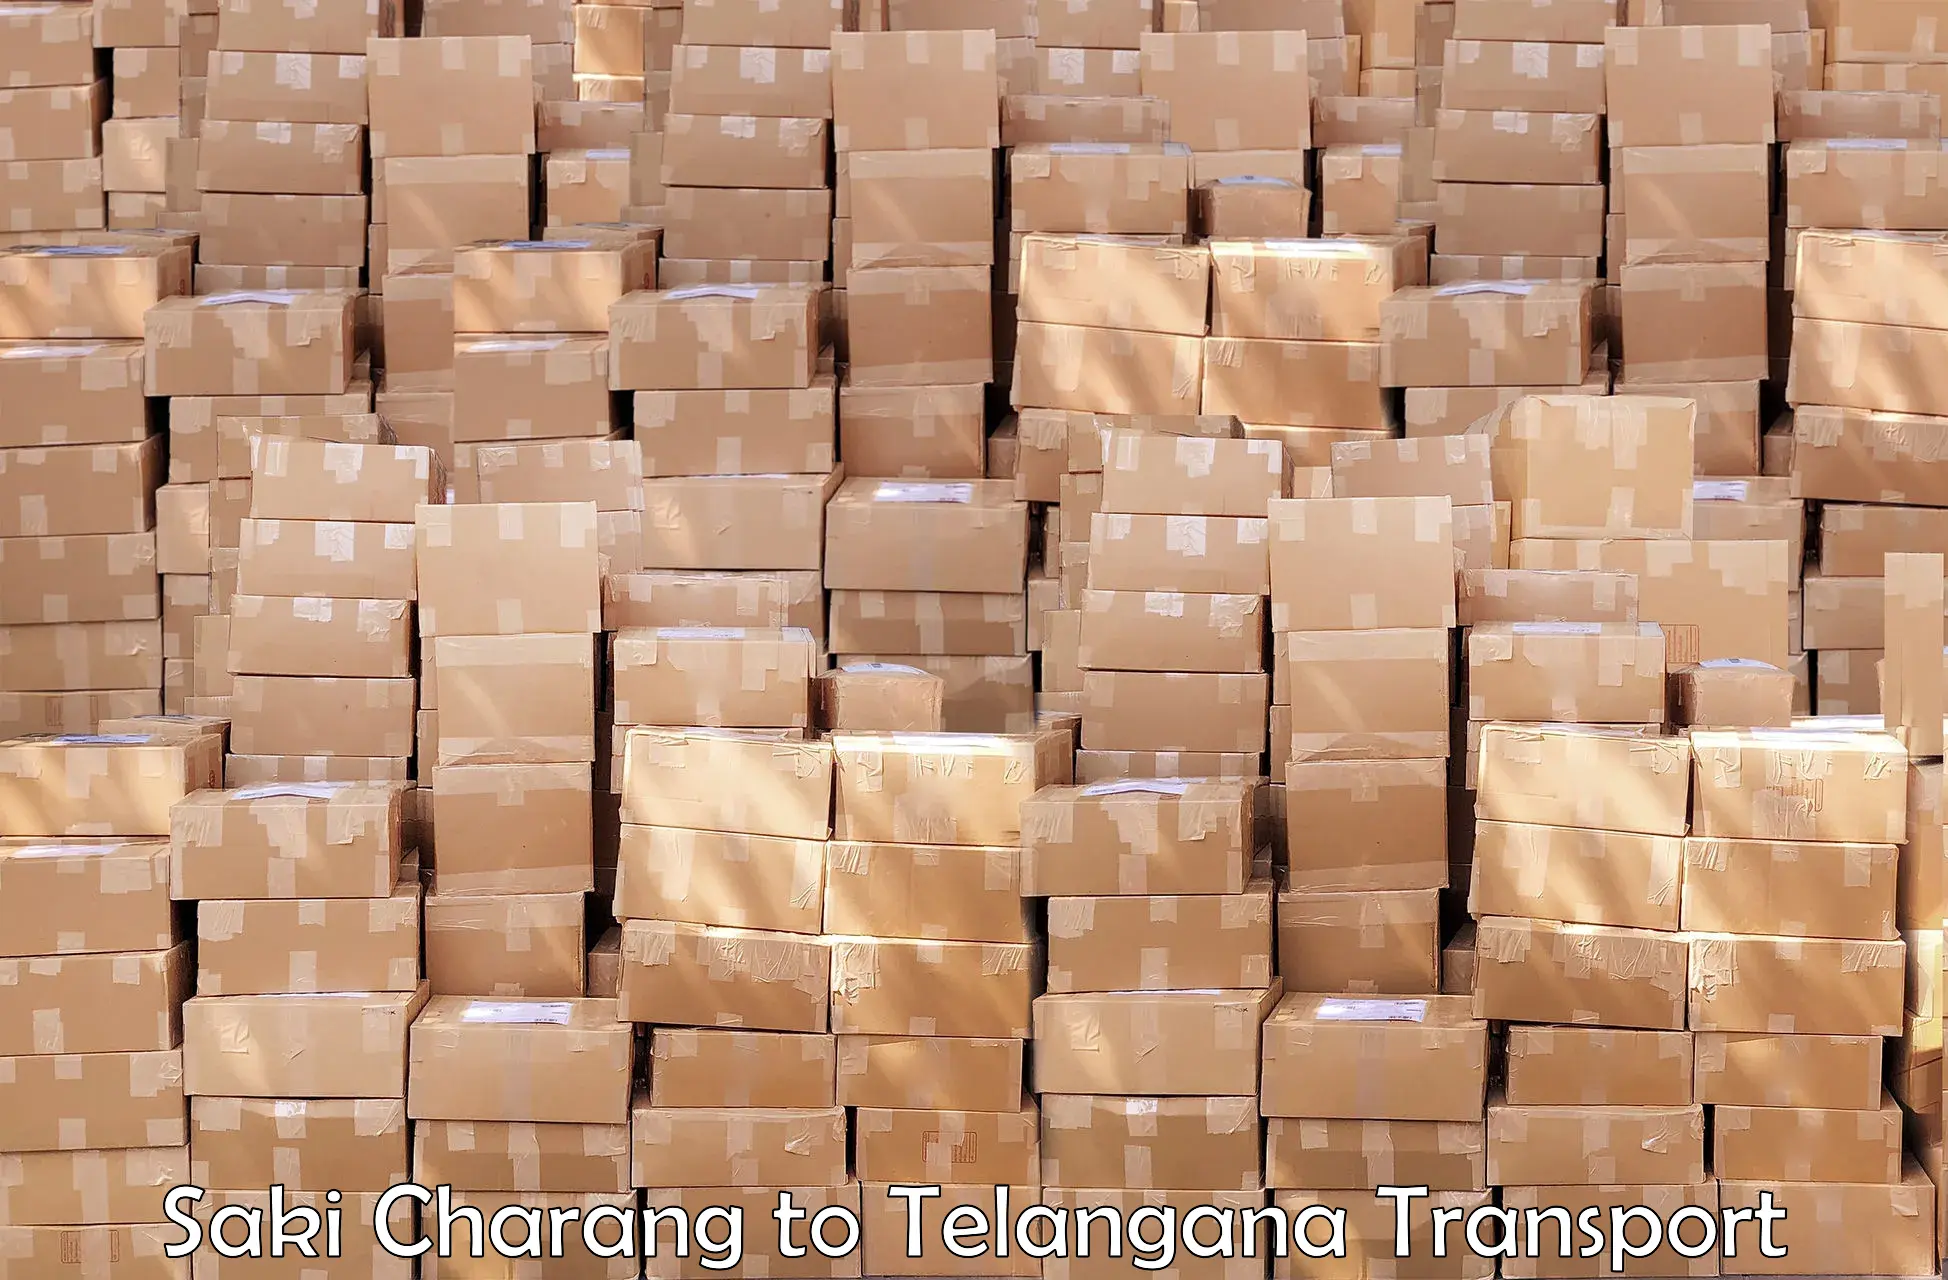 Truck transport companies in India Saki Charang to Mancherial